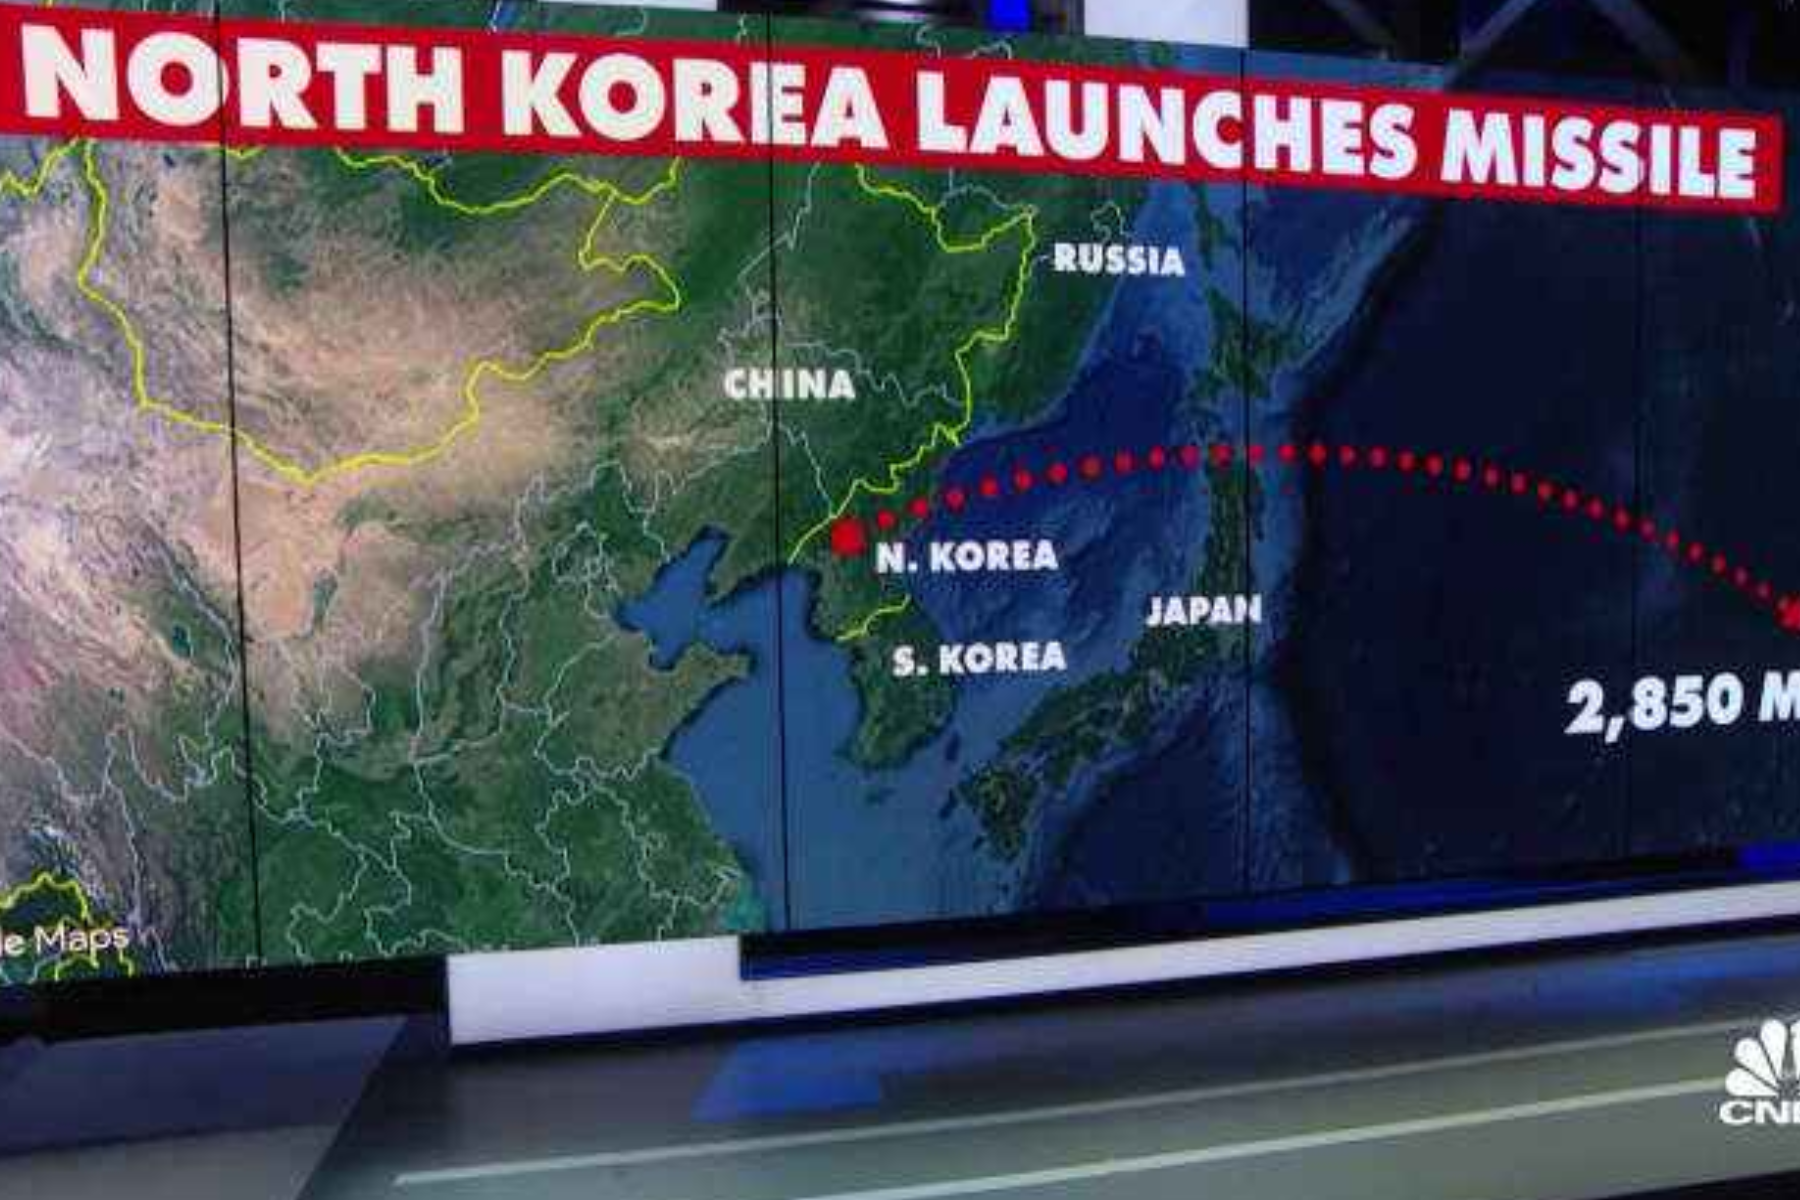 The Launch Of A Missile By North Korea Causes Alarm In Washington